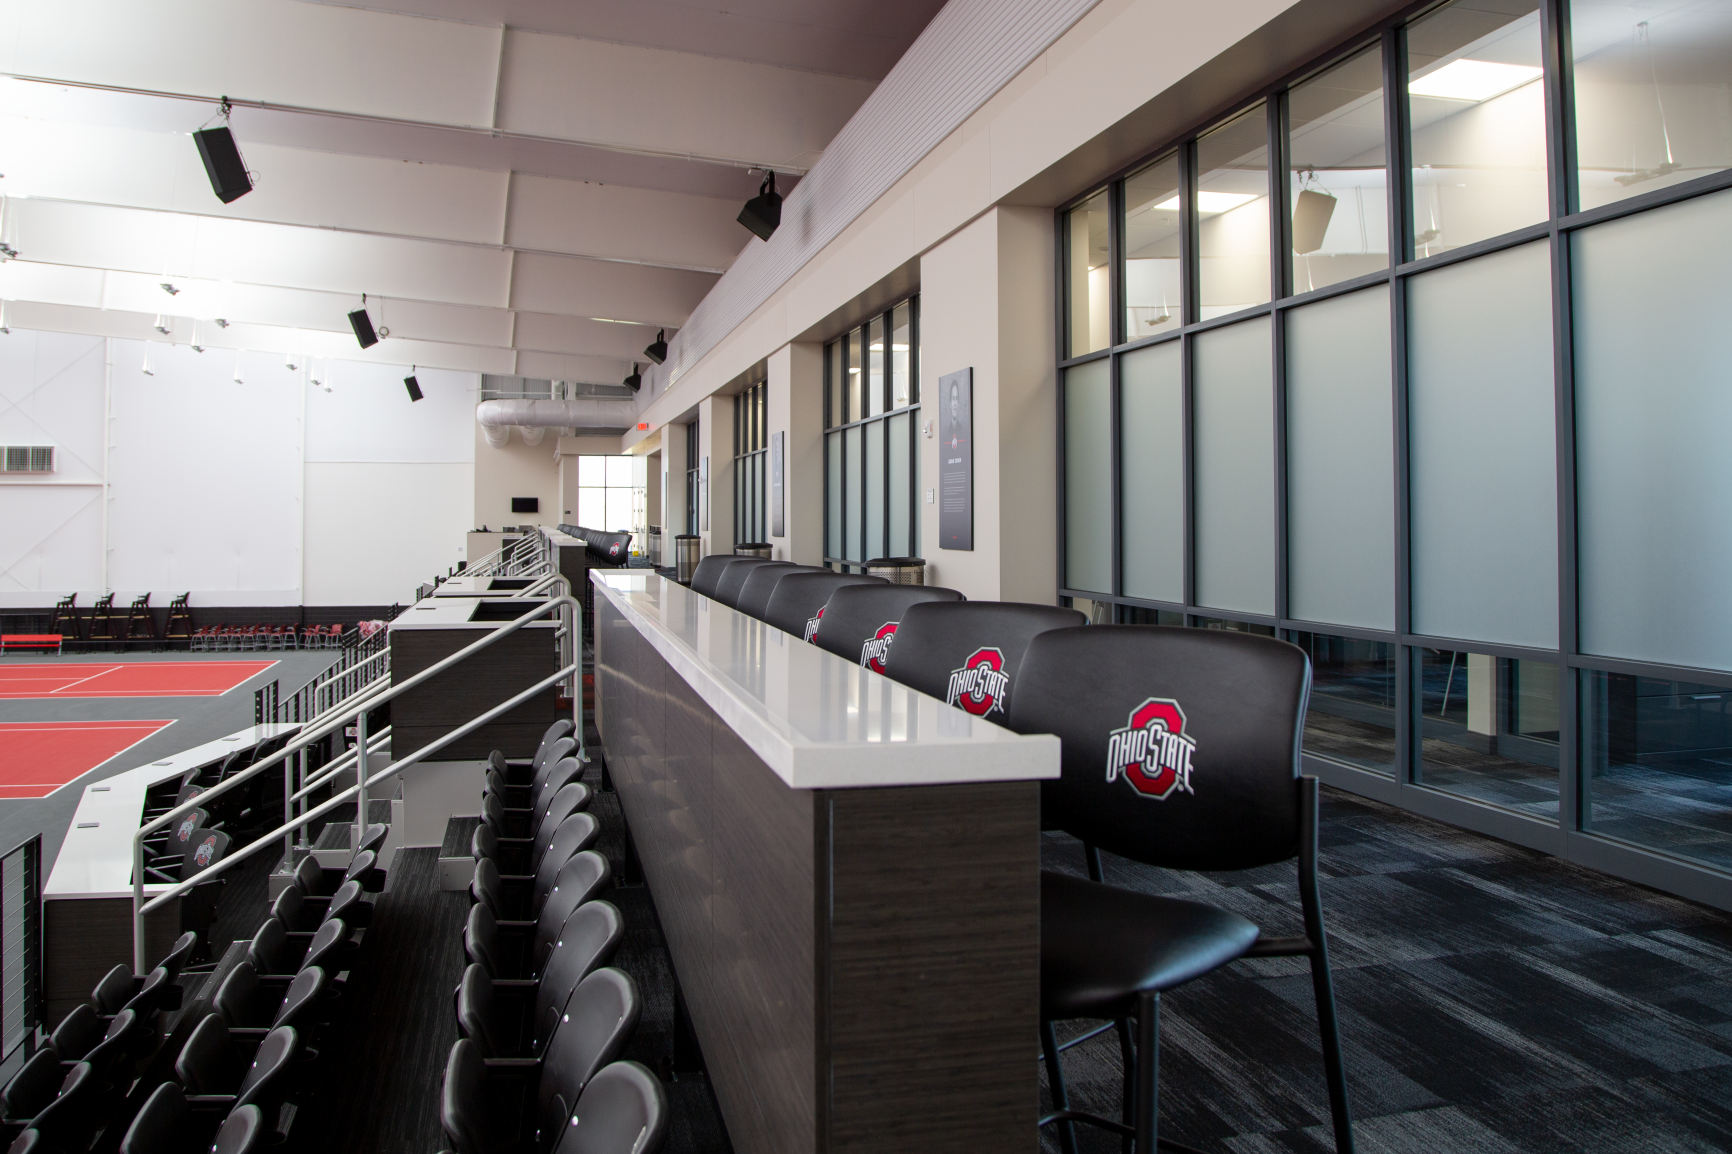 Ty Tucker Tennis Center at The Ohio State University features custom branding solutions and furniture by Continental Office